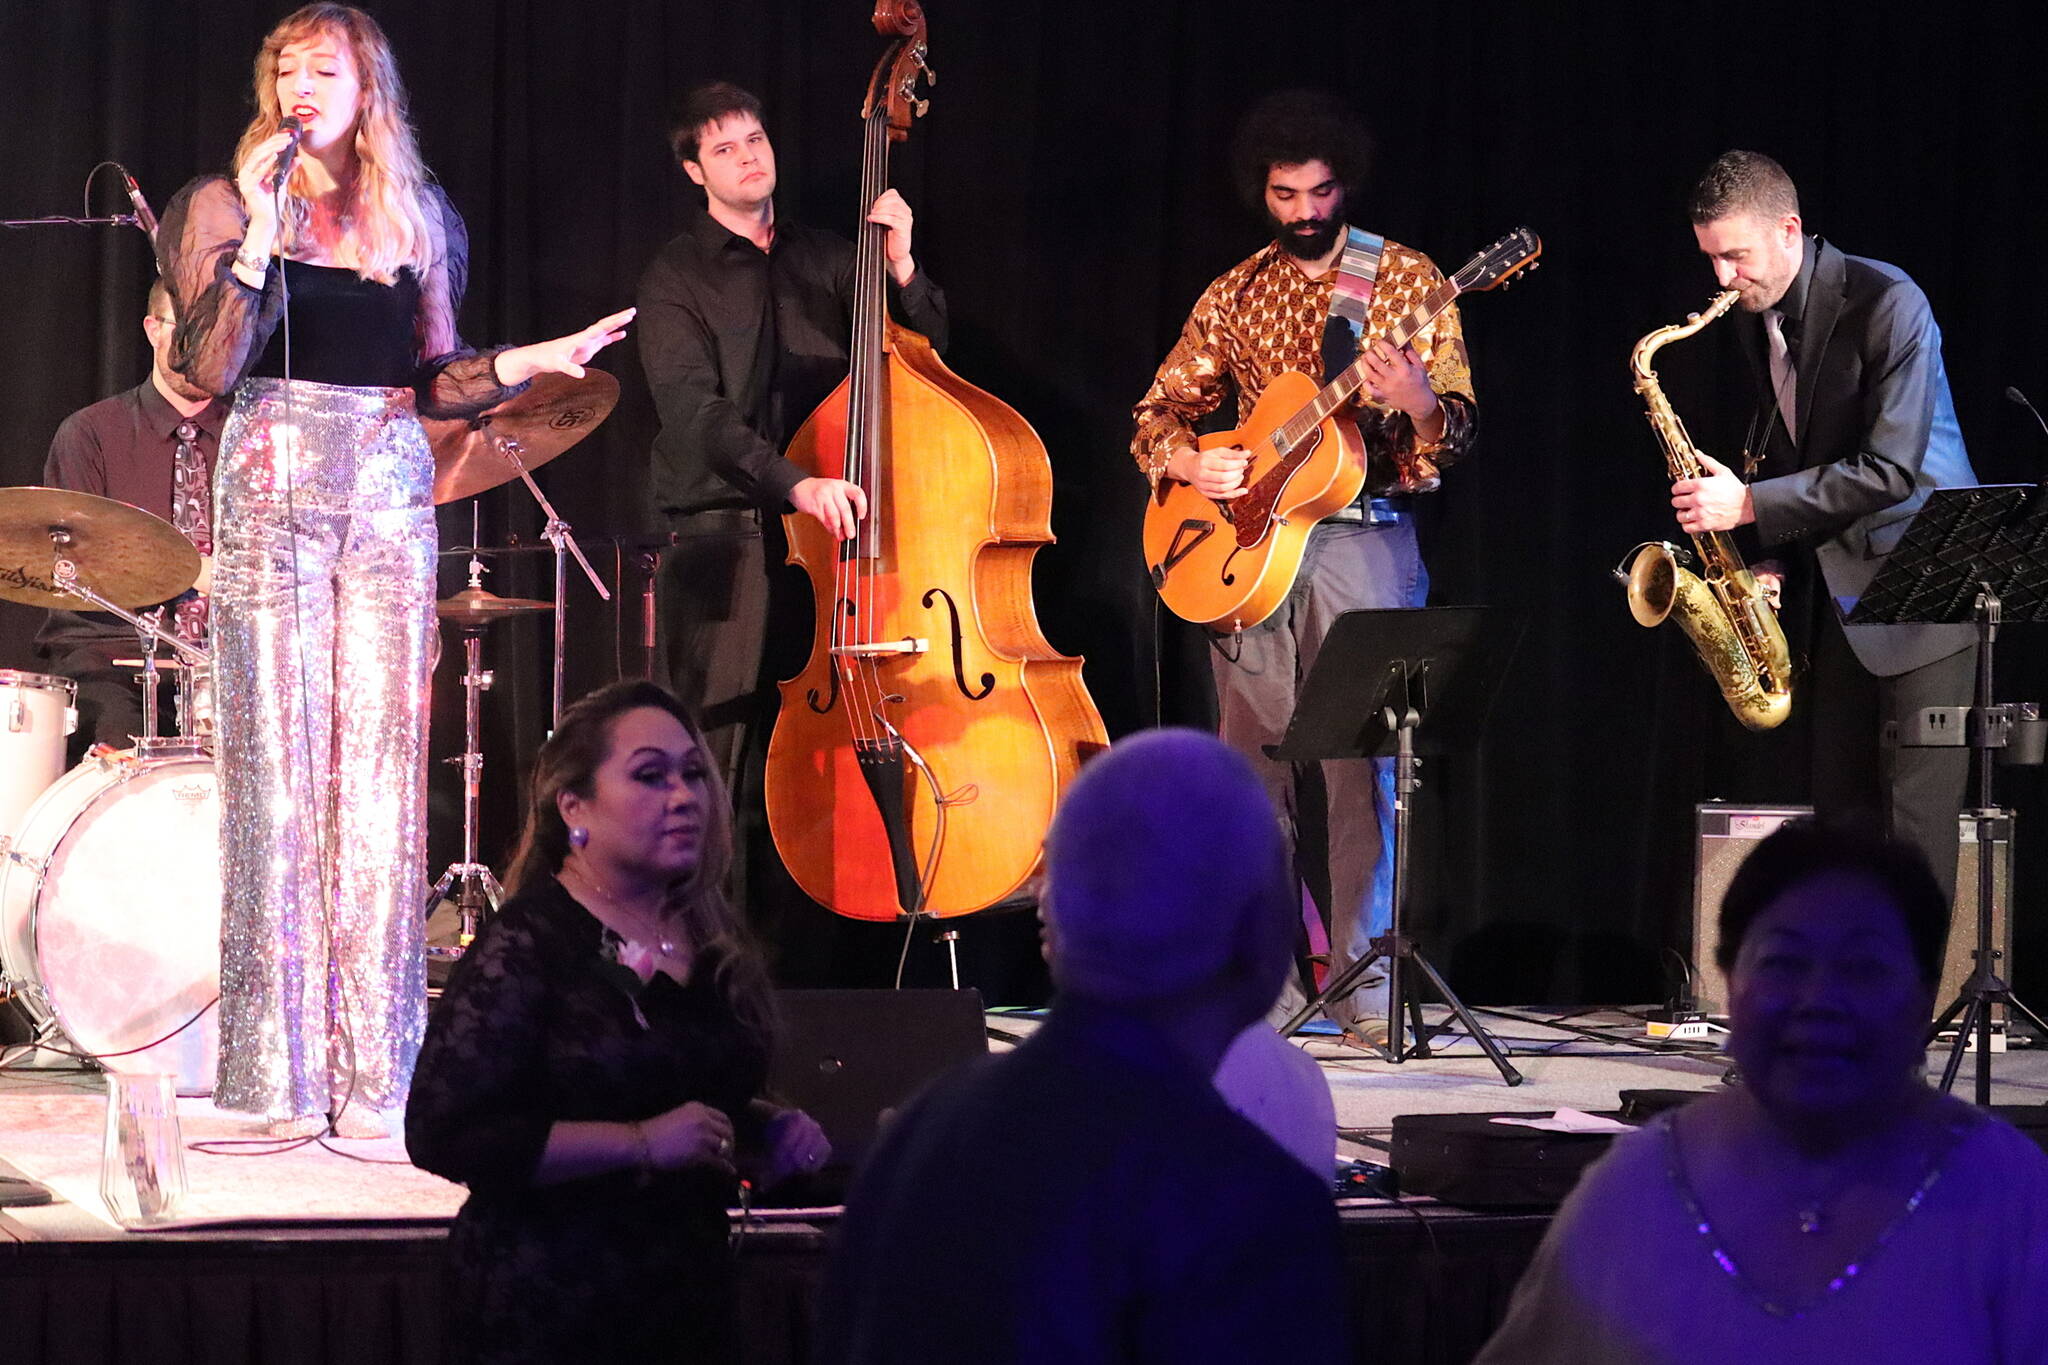 Juneau singer Taylor Vidic leads the Southeast Swingings in an evening of jazz performances during the inaugural celebration for Gov. Mike Dunleavy and Lt. Gov. Nancy Dahlstrom on Friday night at Elizabeth Peratrovich Hall. (Mark Sabbatini / Juneau Empire)